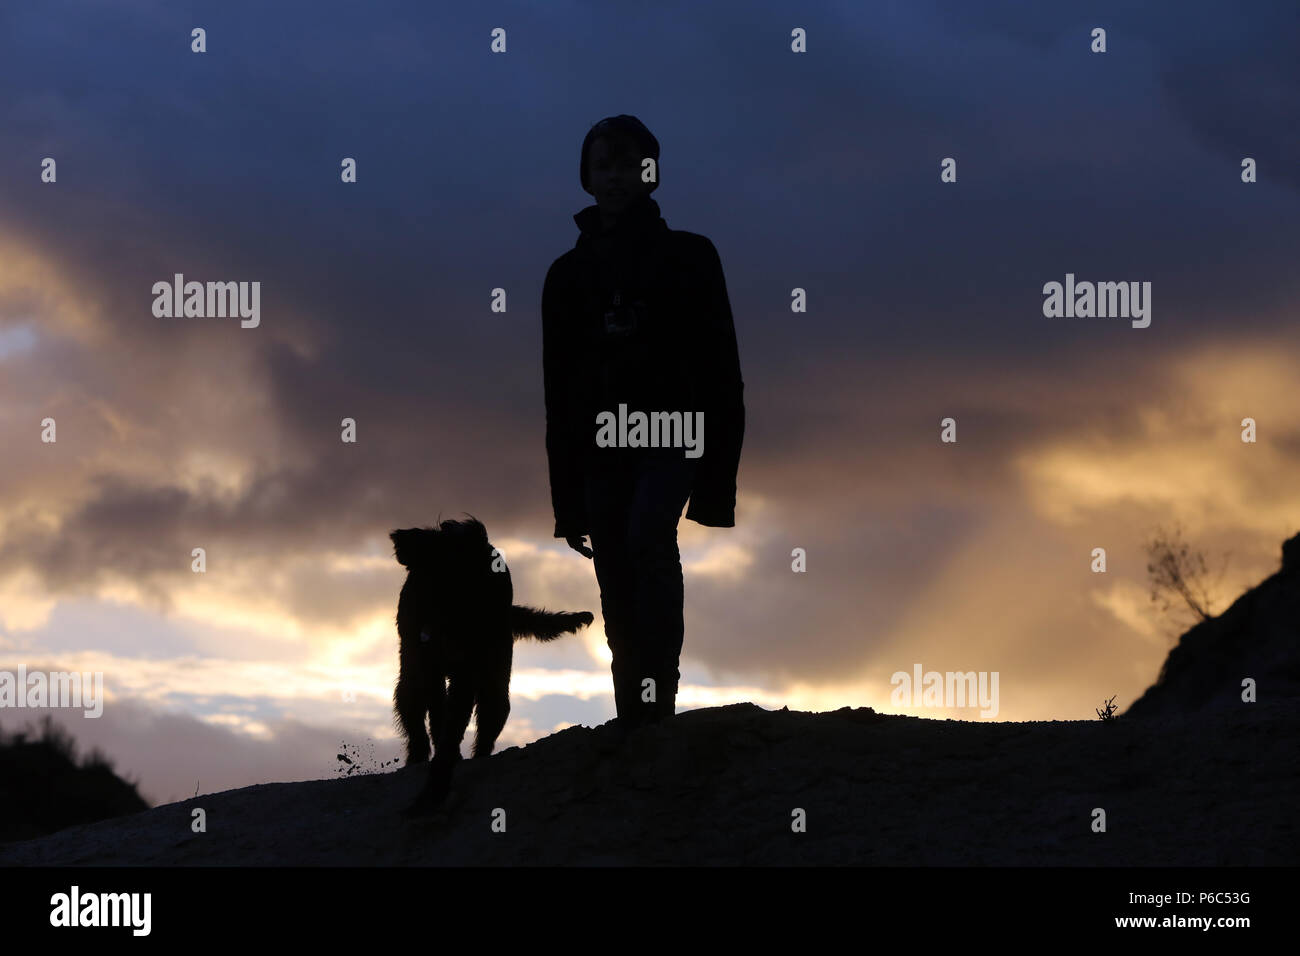 Wustrow, Germany - Silhouette, boy stands with his dog on a dune in the evening Stock Photo